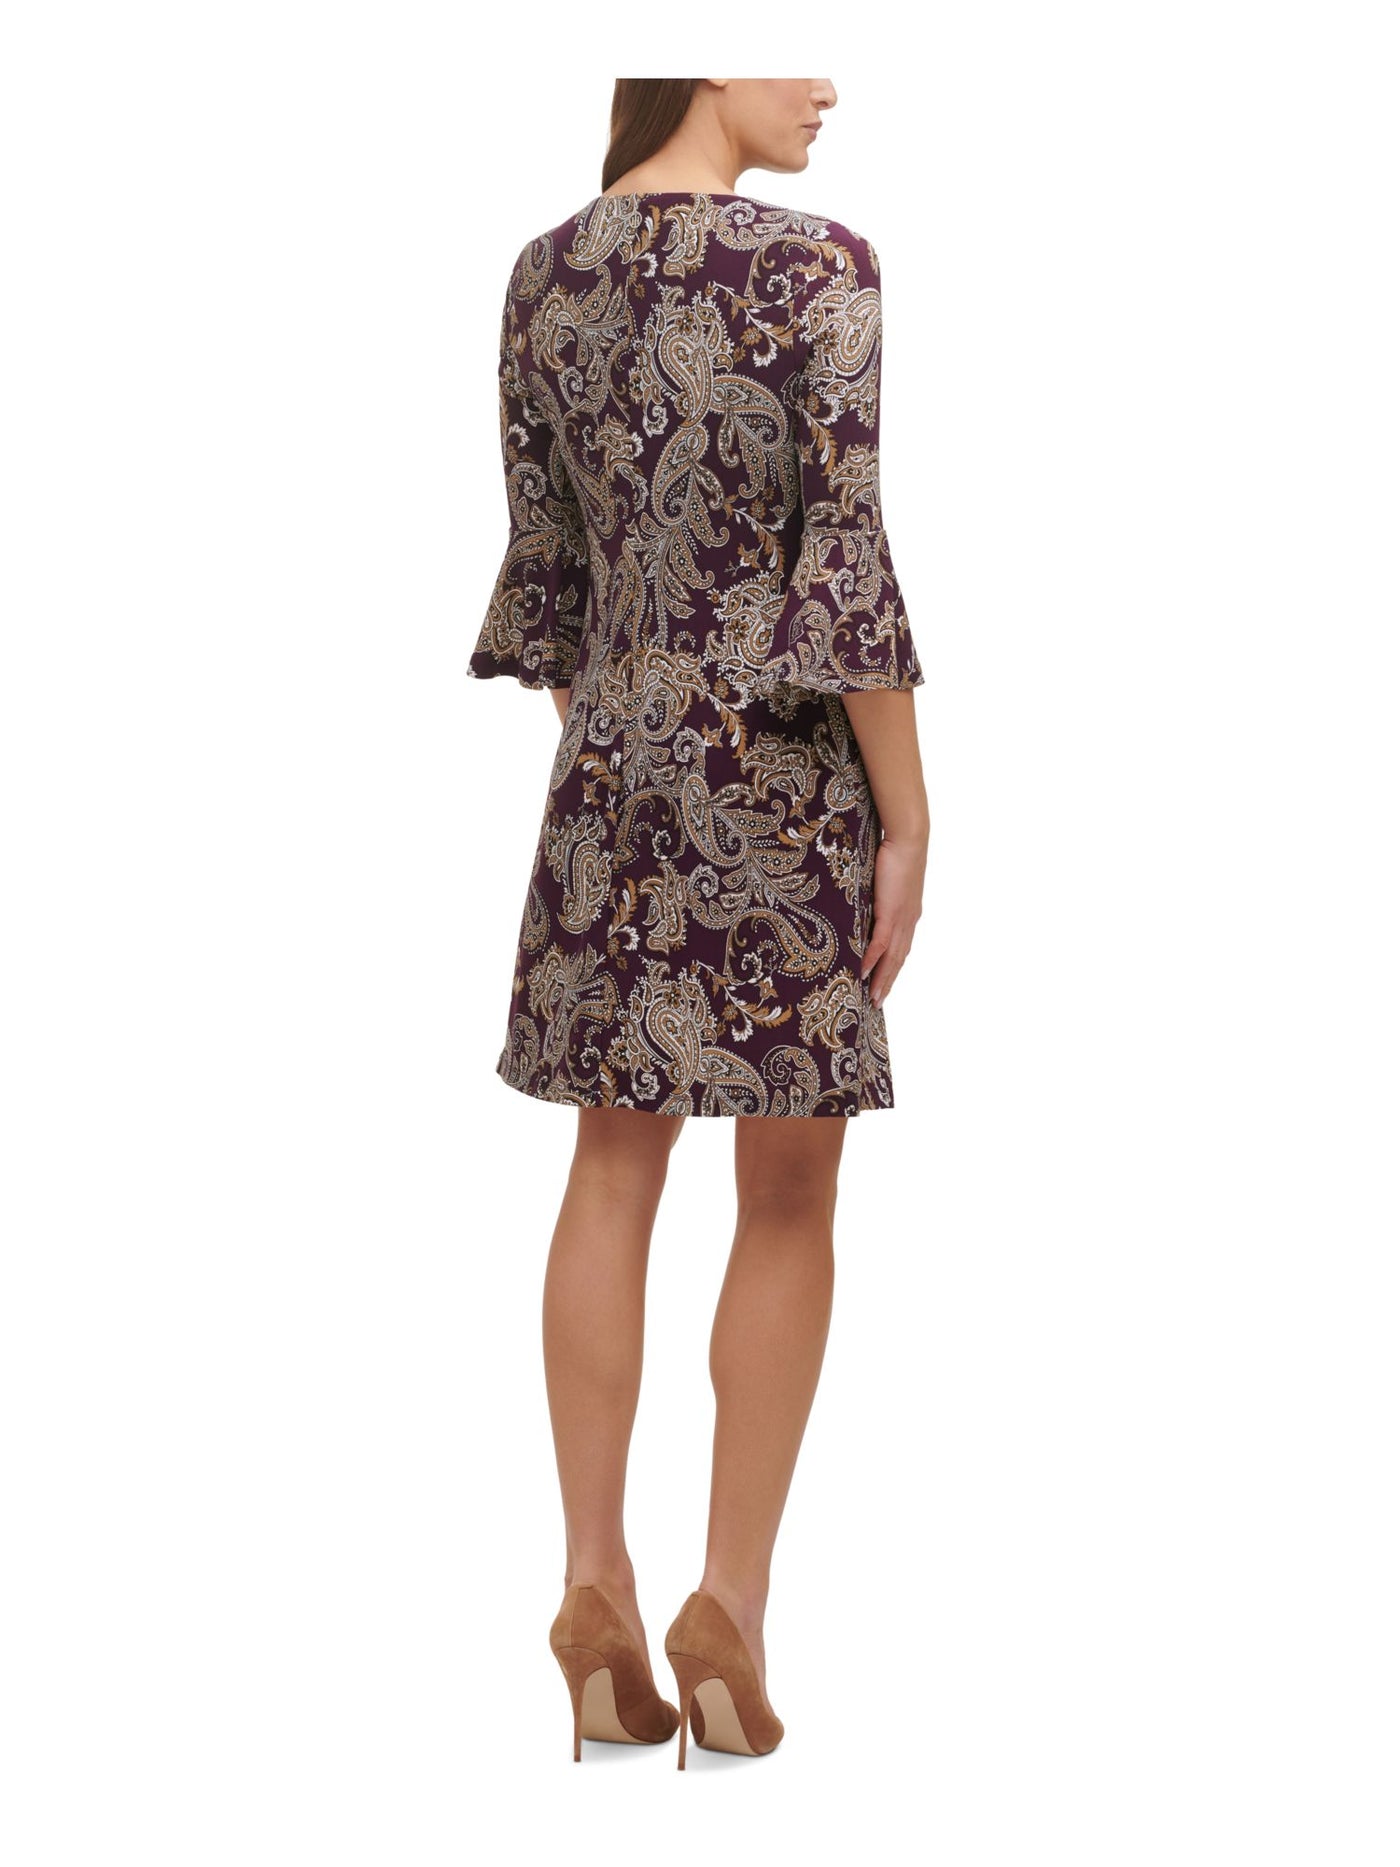 TOMMY HILFIGER Womens Purple Stretch Paisley Bell Sleeve Round Neck Above The Knee Cocktail Shift Dress Petites 0P